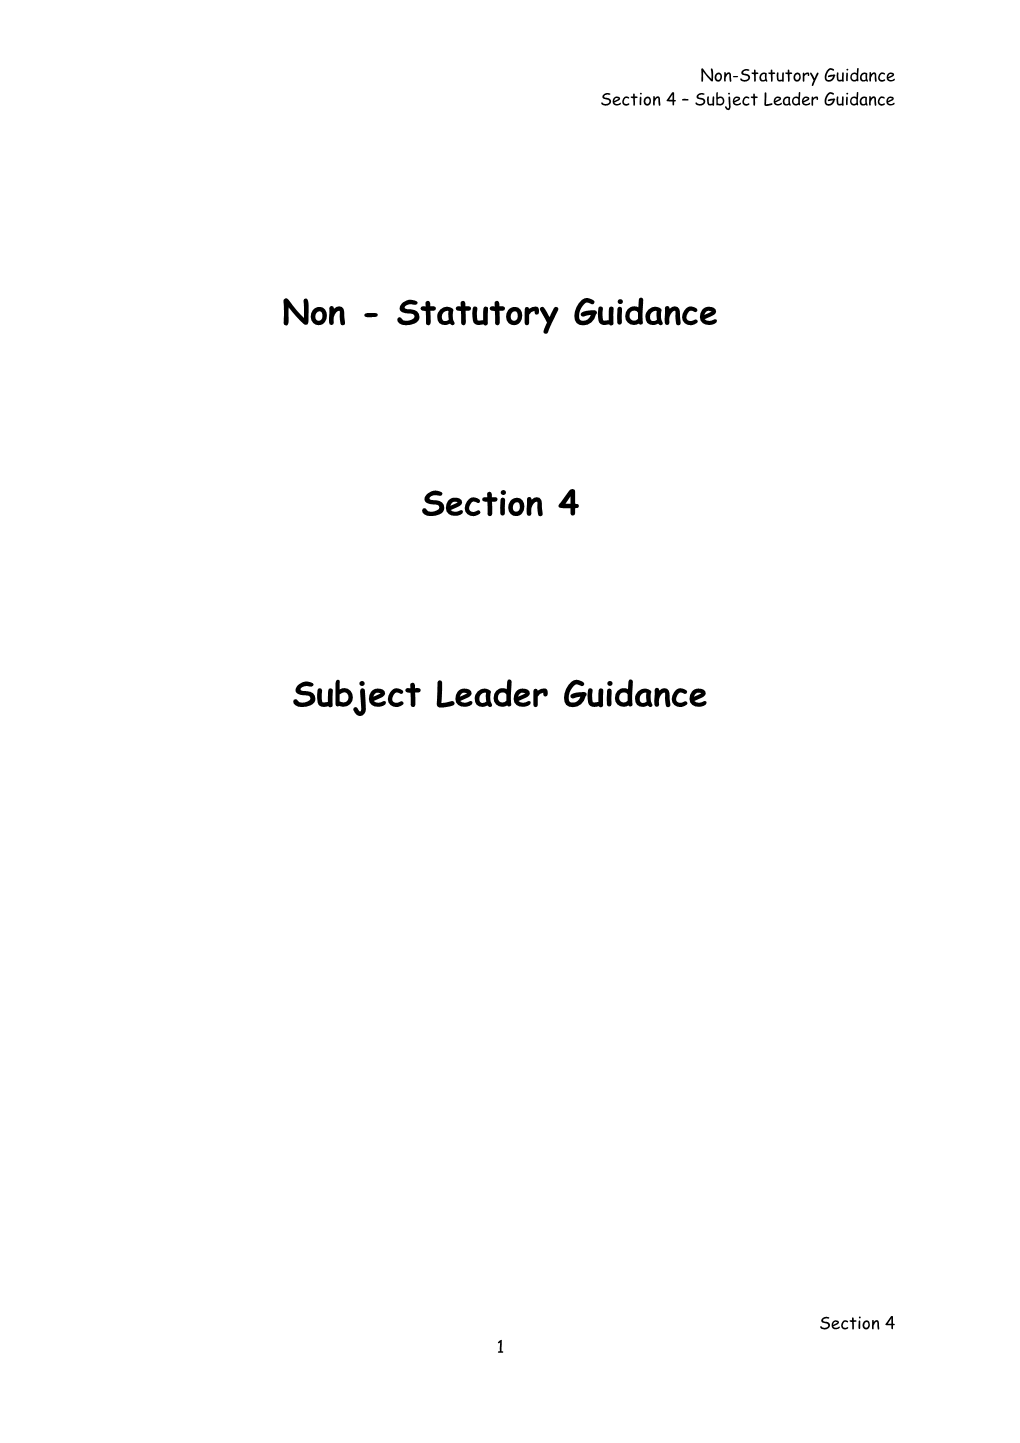 Leadership and Management of Re : the Role of the Subject Leader